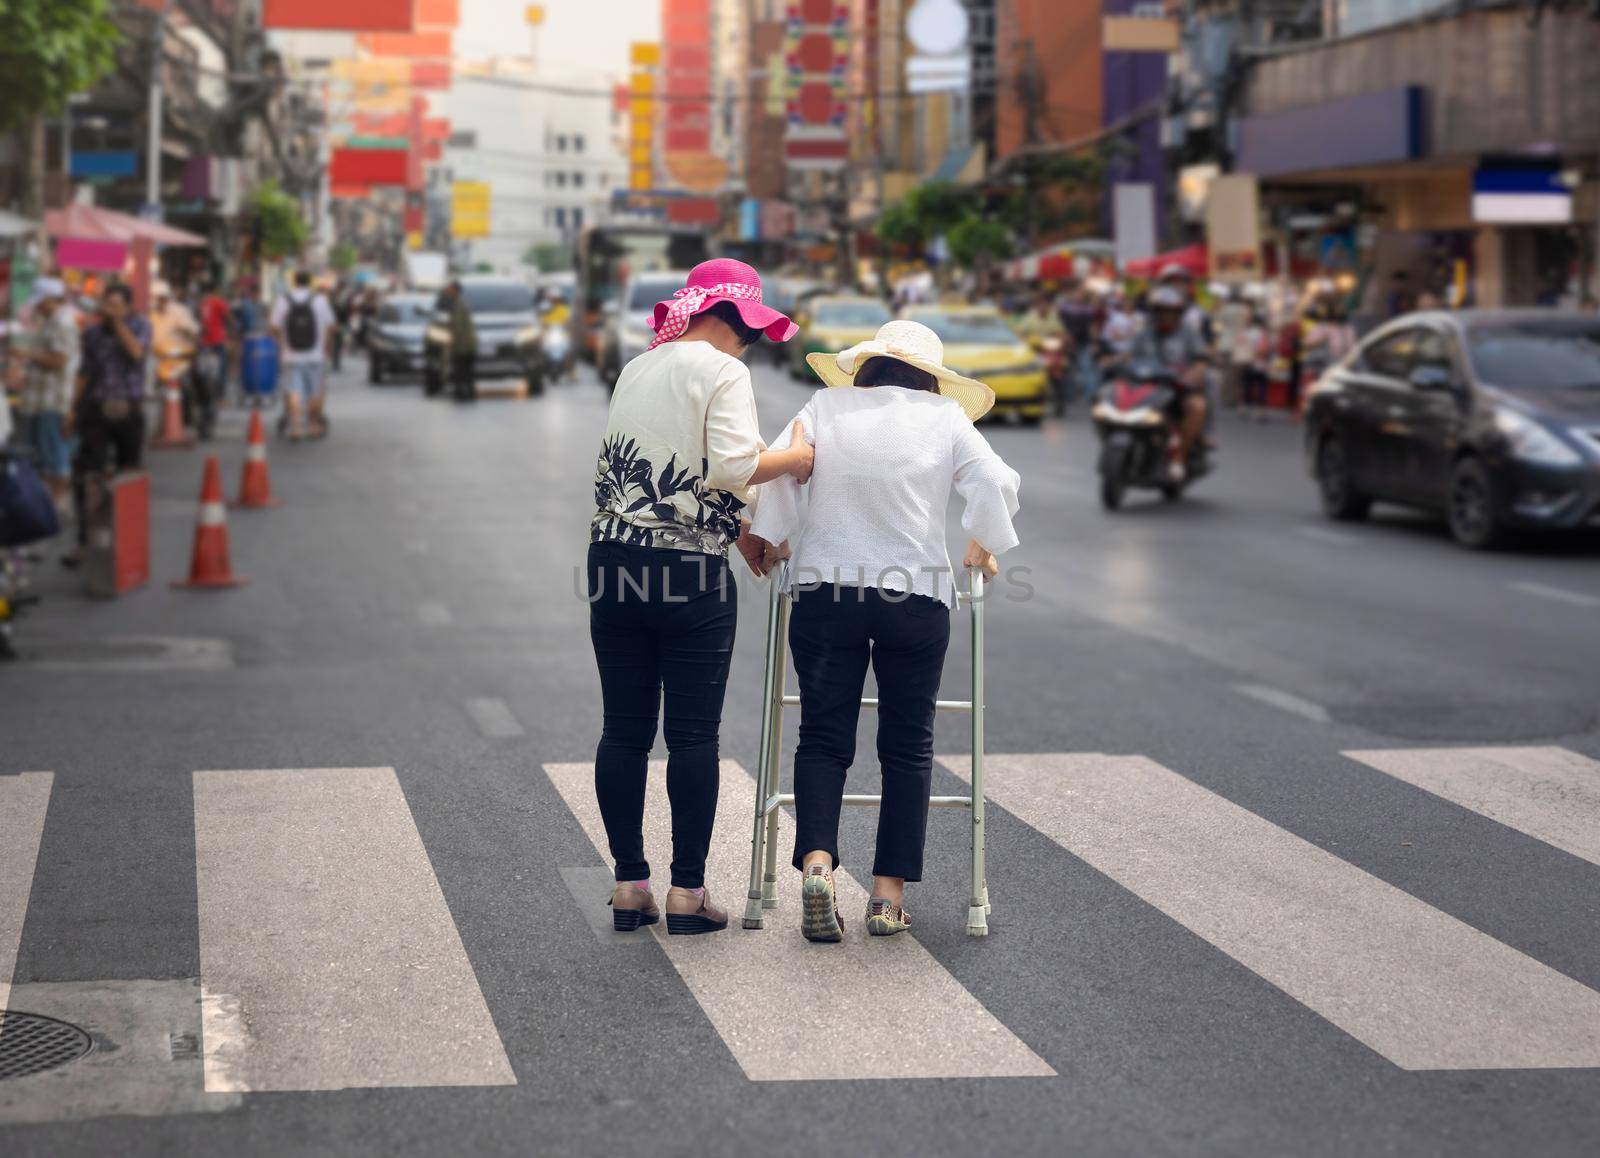 Daughter take care elderly woman crossing the street in Chinatown area by toa55